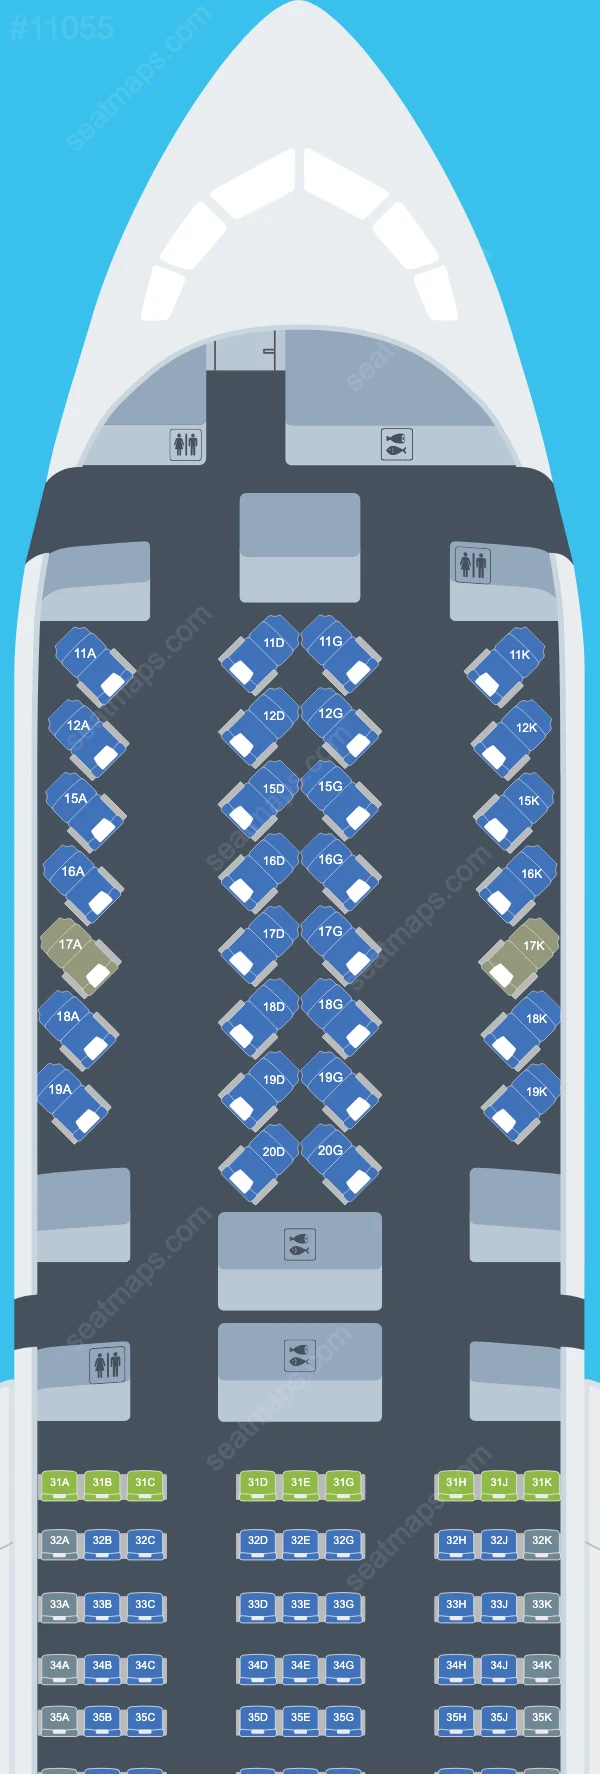 Bamboo Airways Boeing 787-9 seatmap preview